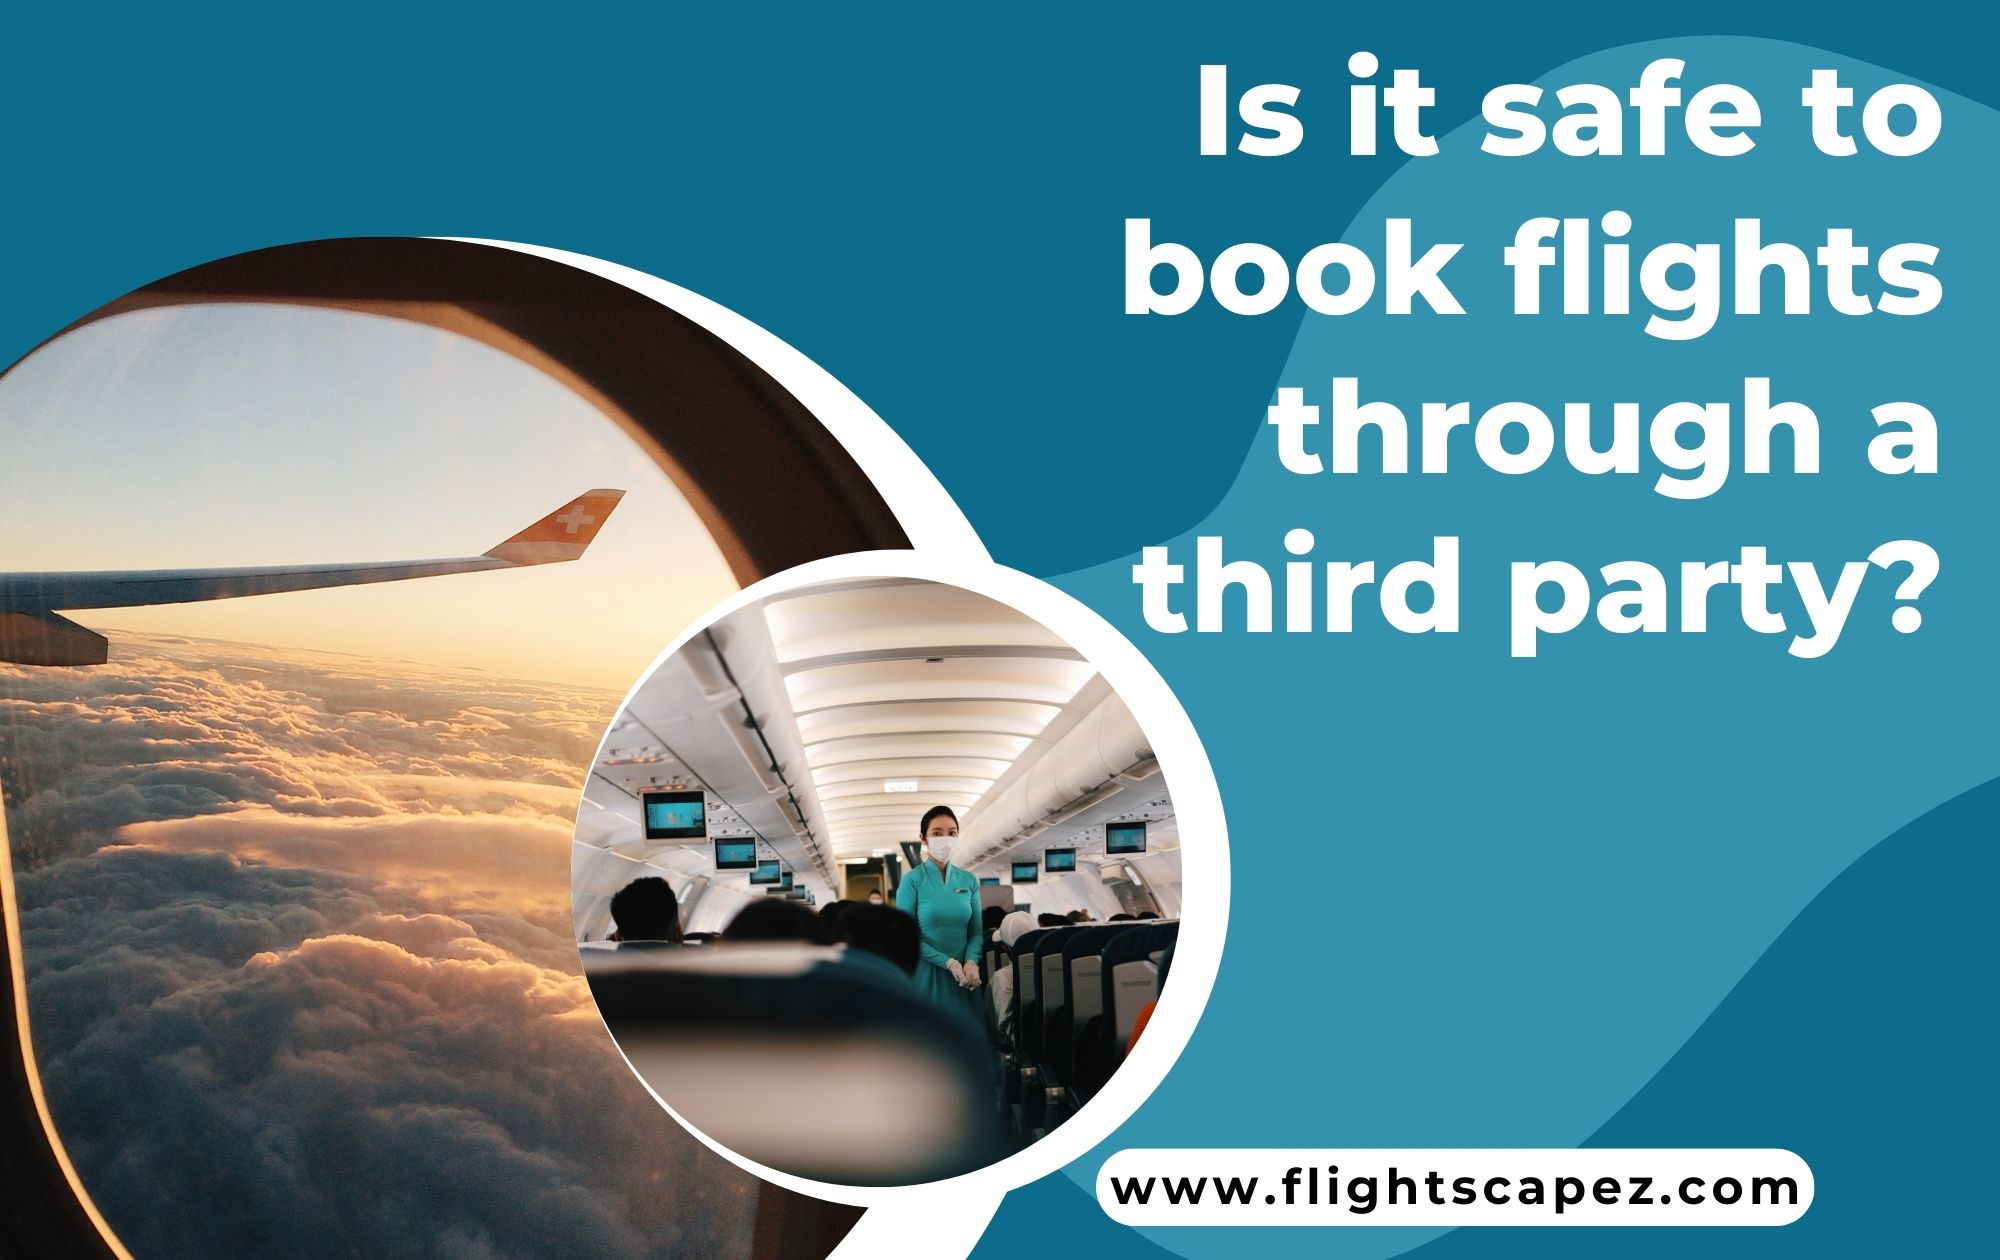 Is it safe to book flights through a third party